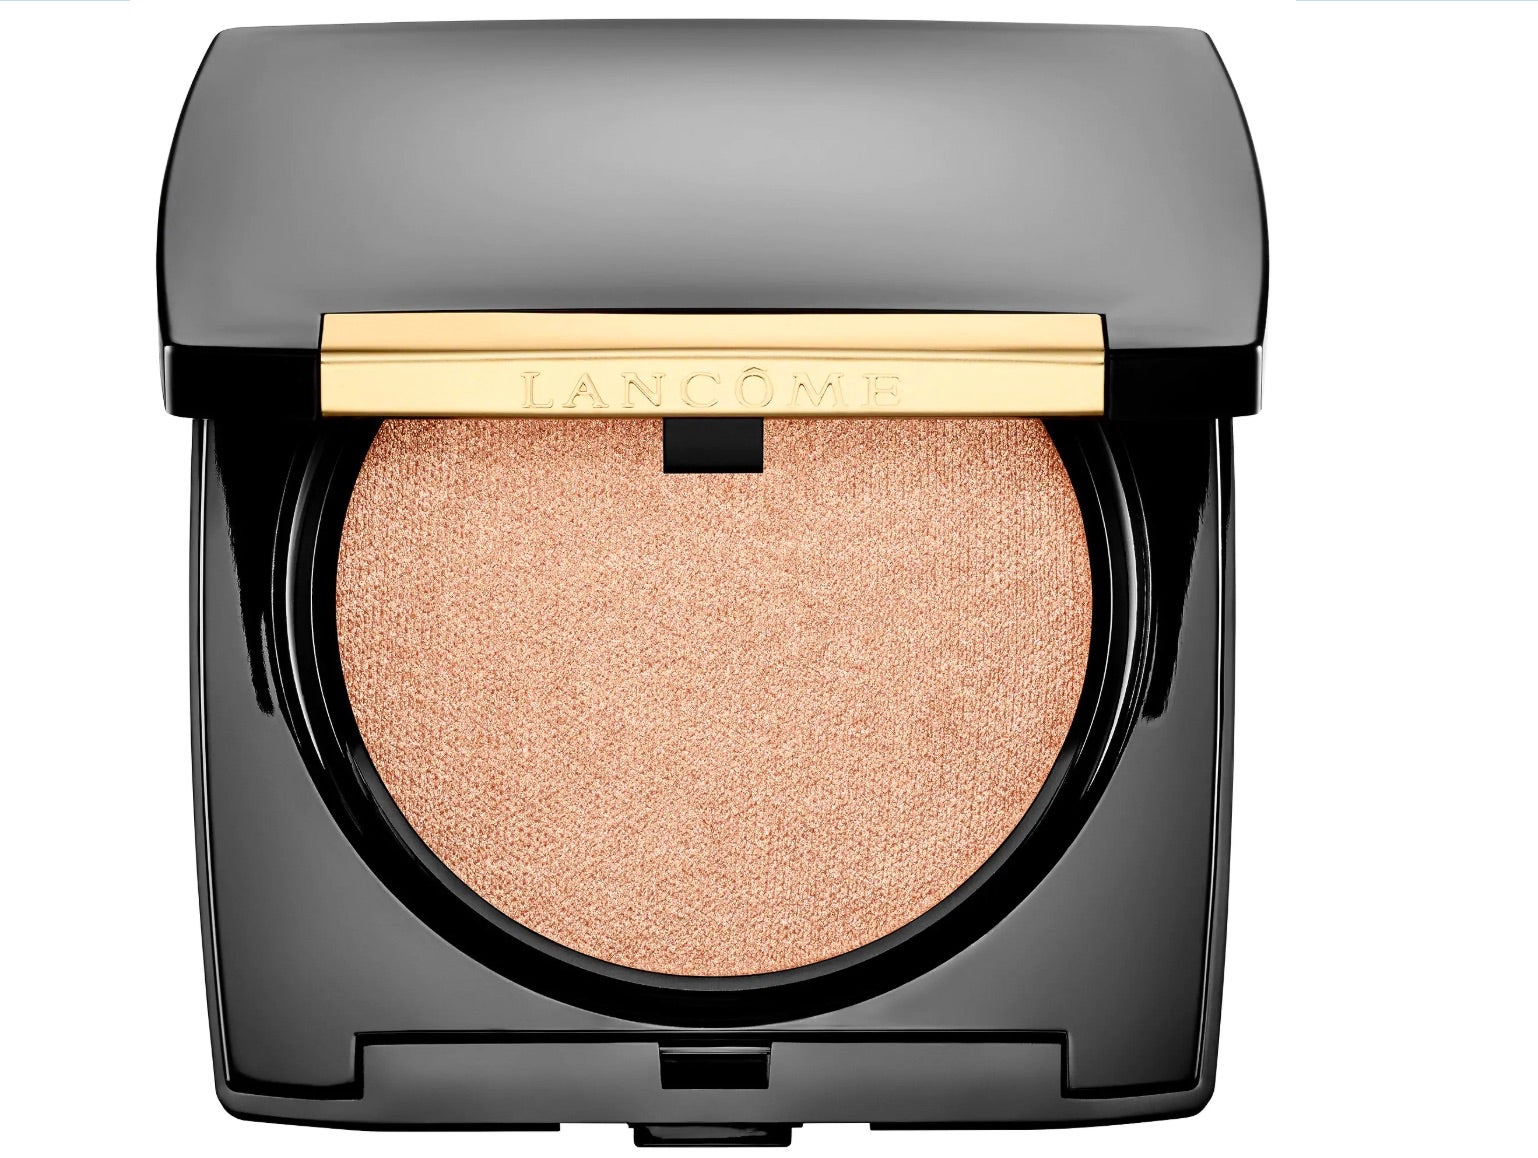 7 Highlighters That Don't Look Ashy On Dark Skin Tones